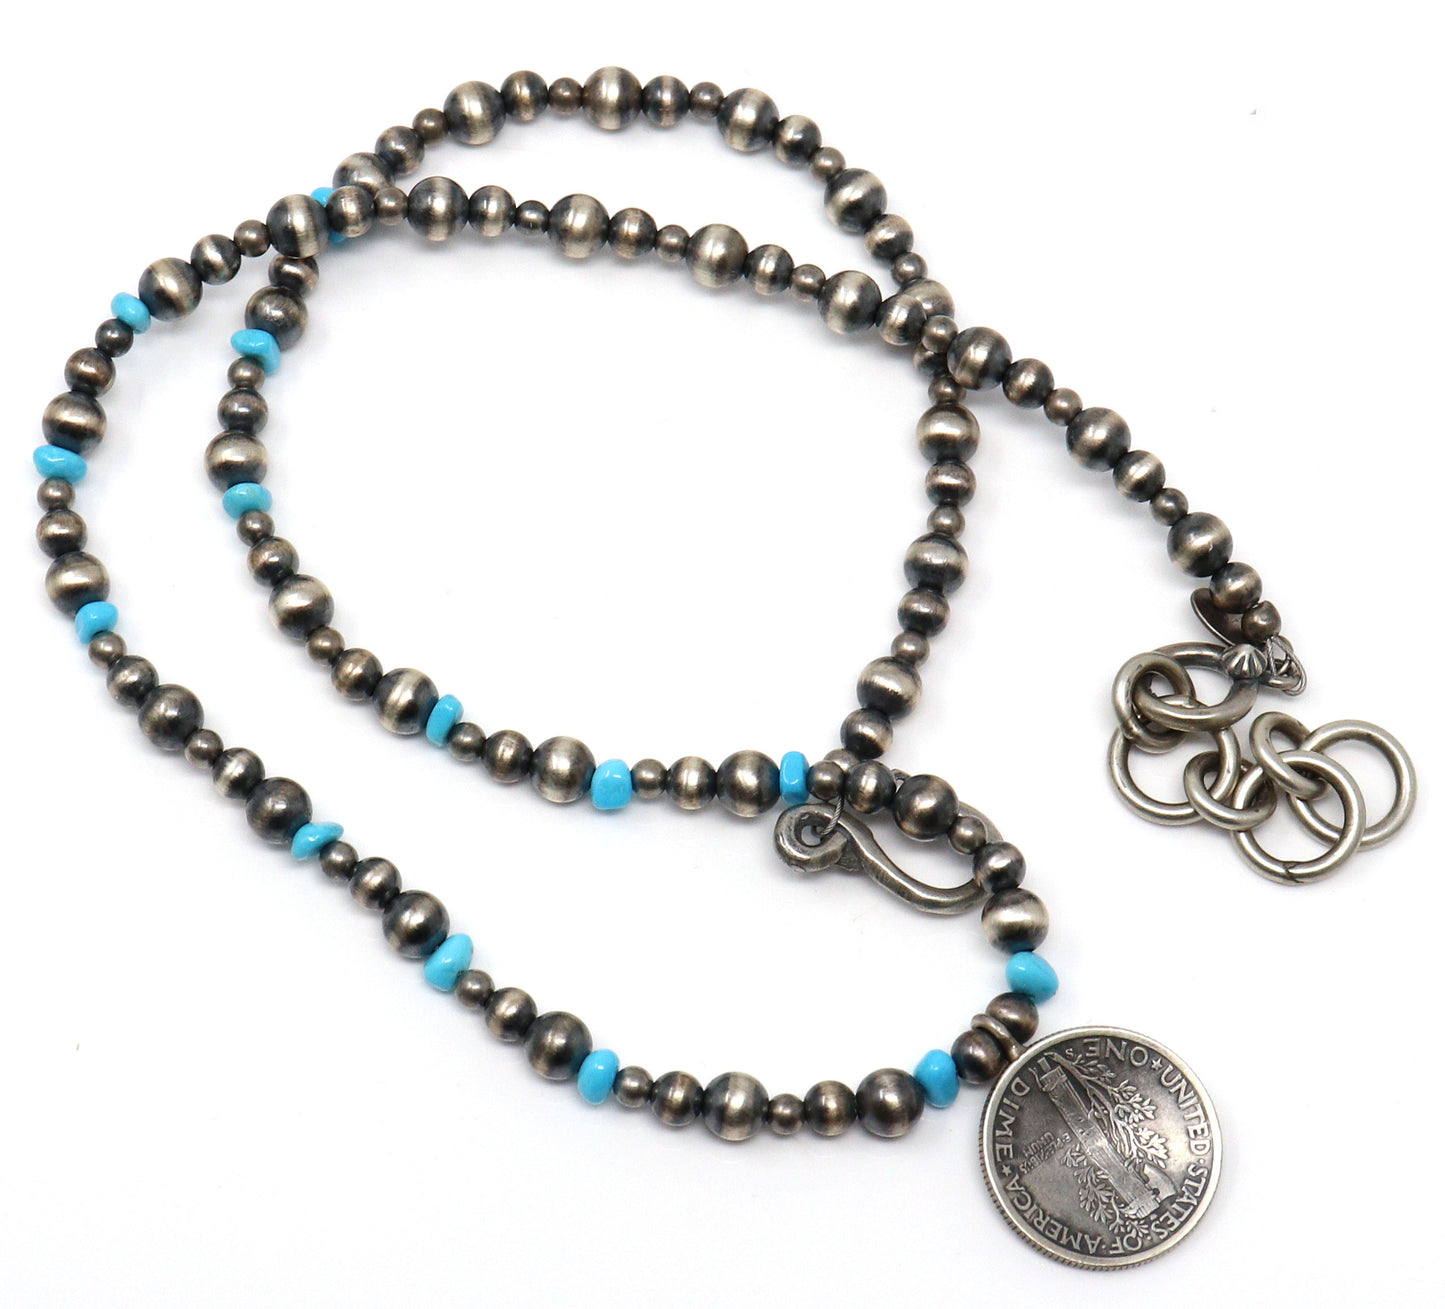 Mercury Dime & Silver Bead Necklace by Belone